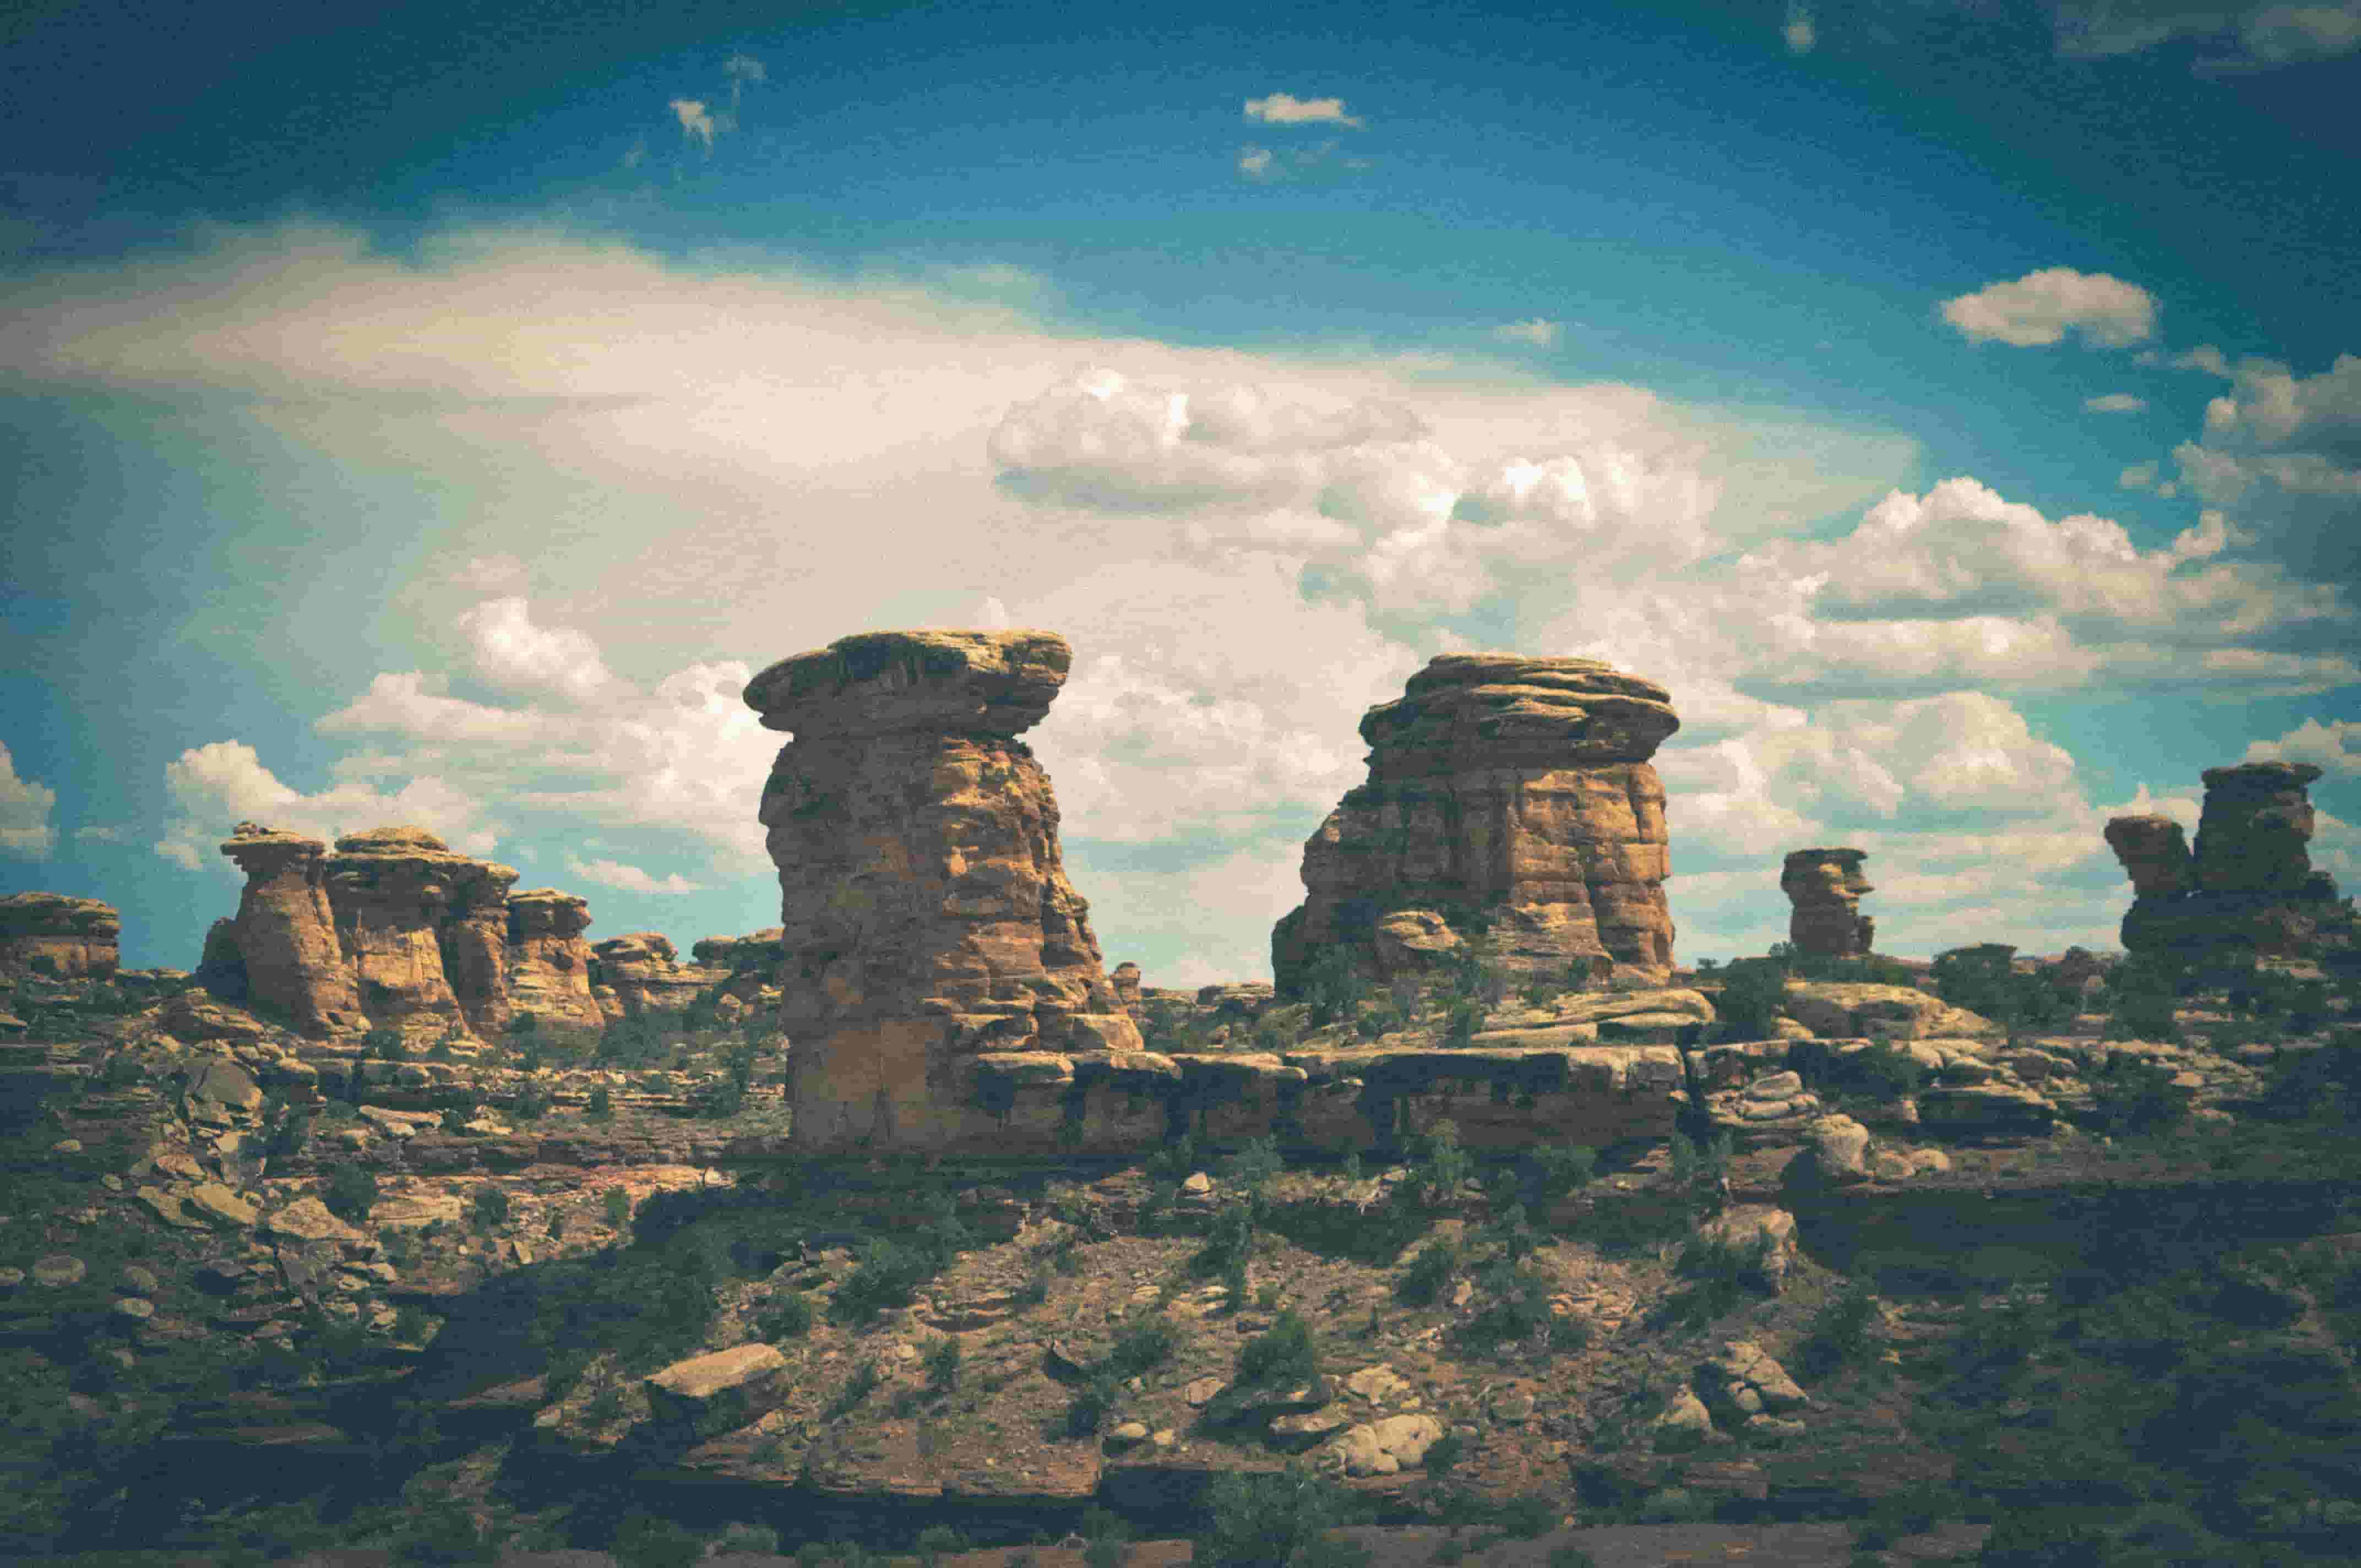 Rock formation in Canyonlands National Park